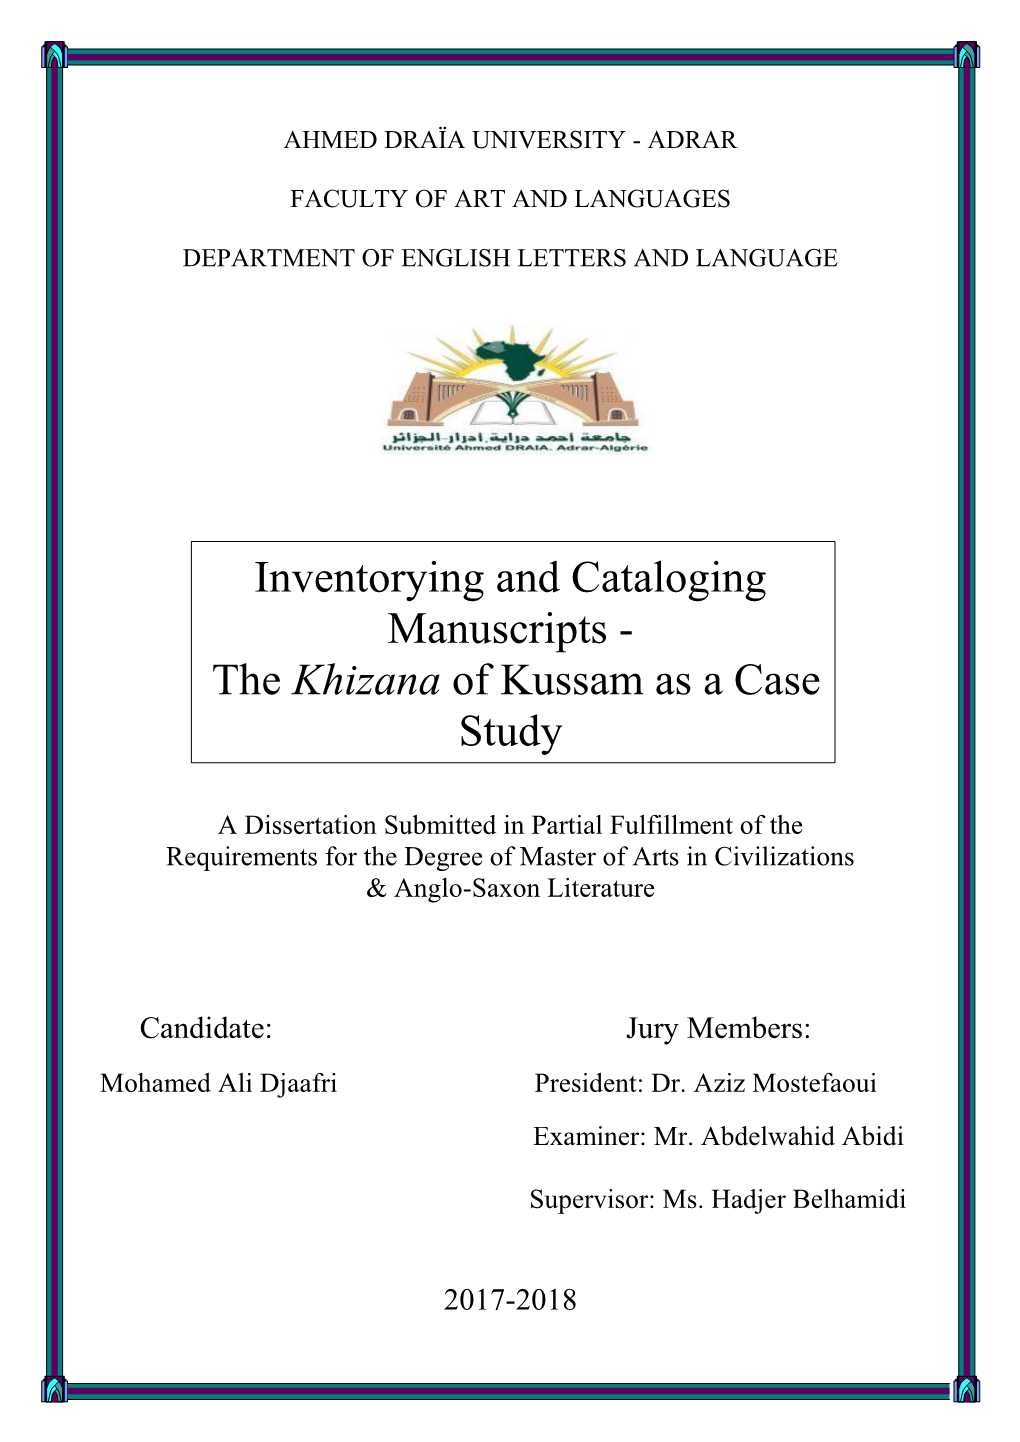 Inventorying and Cataloging Manuscripts - the Khizana of Kussam As a Case Study